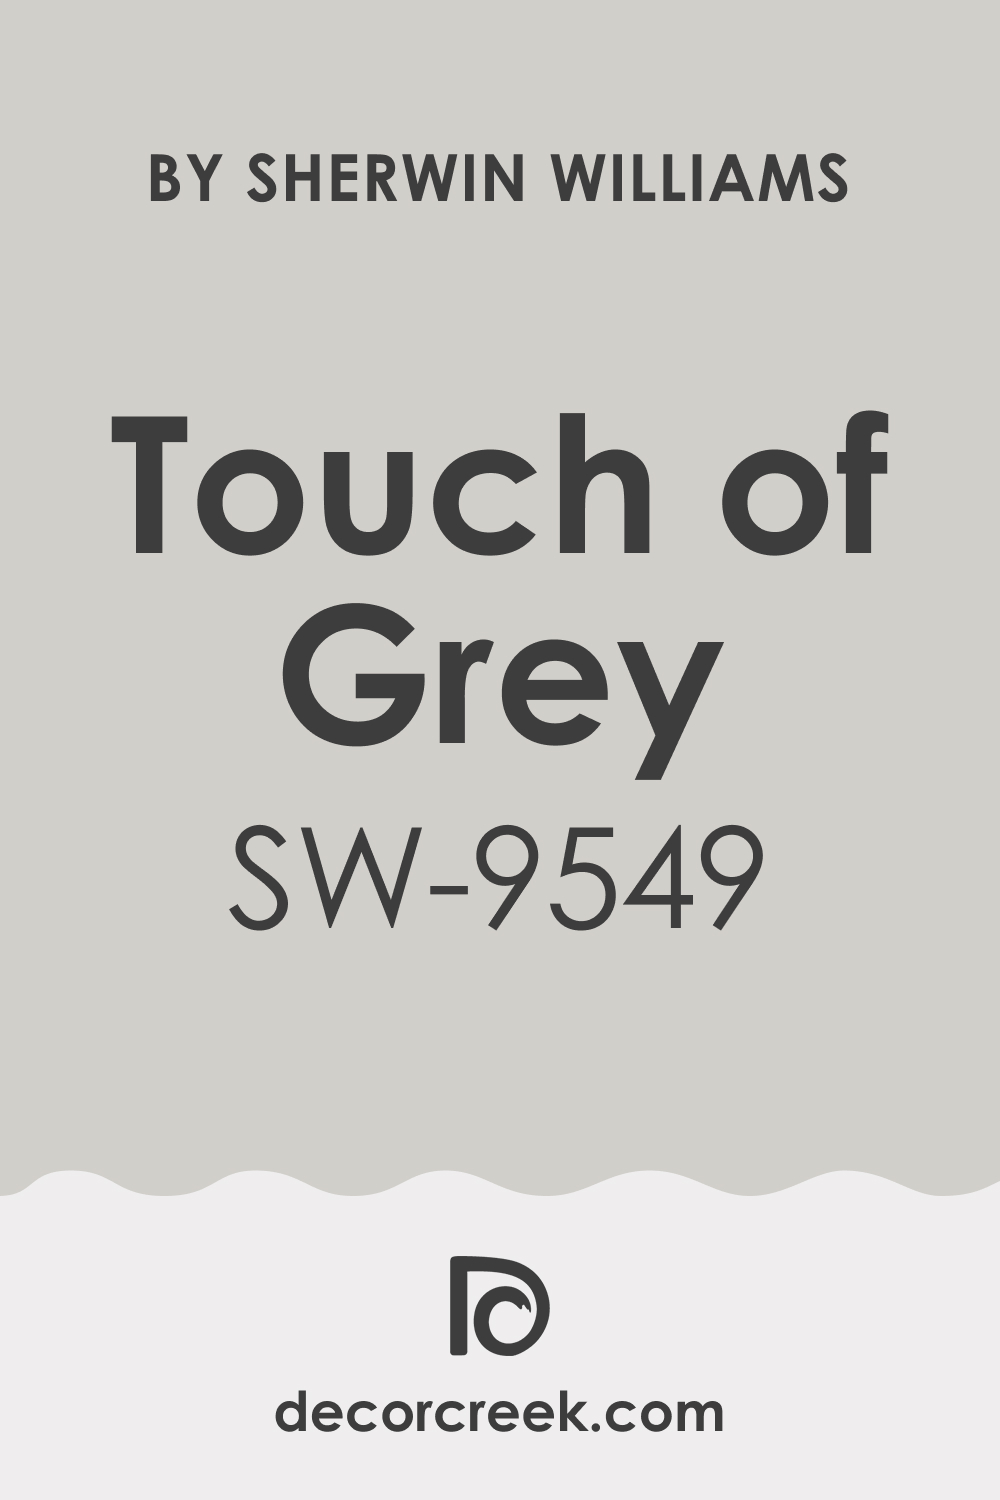 Touch of Grey SW 9549 Paint Color by Sherwin-Williams